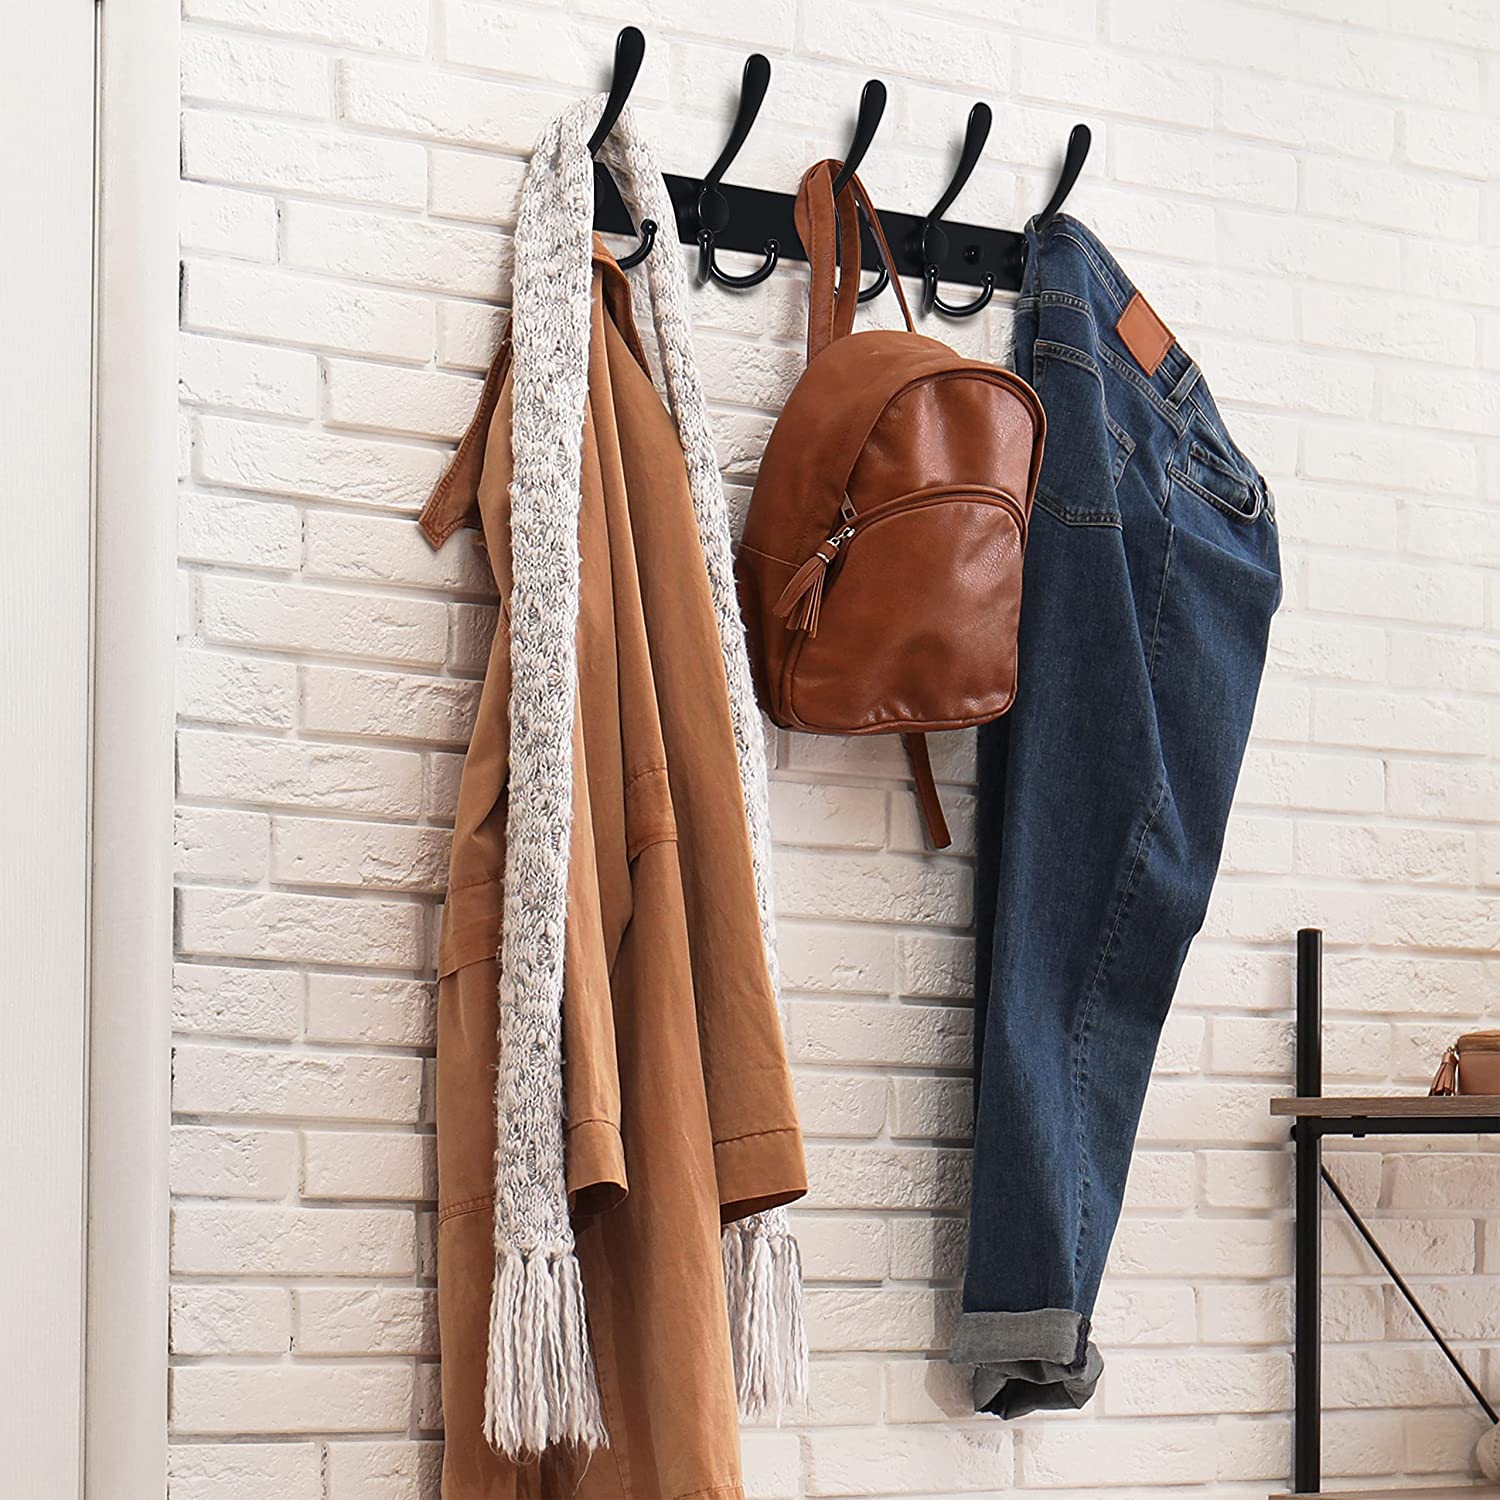 Clothes and accessories hanging from Dseap Wall Mounted Metal Coat Hooks